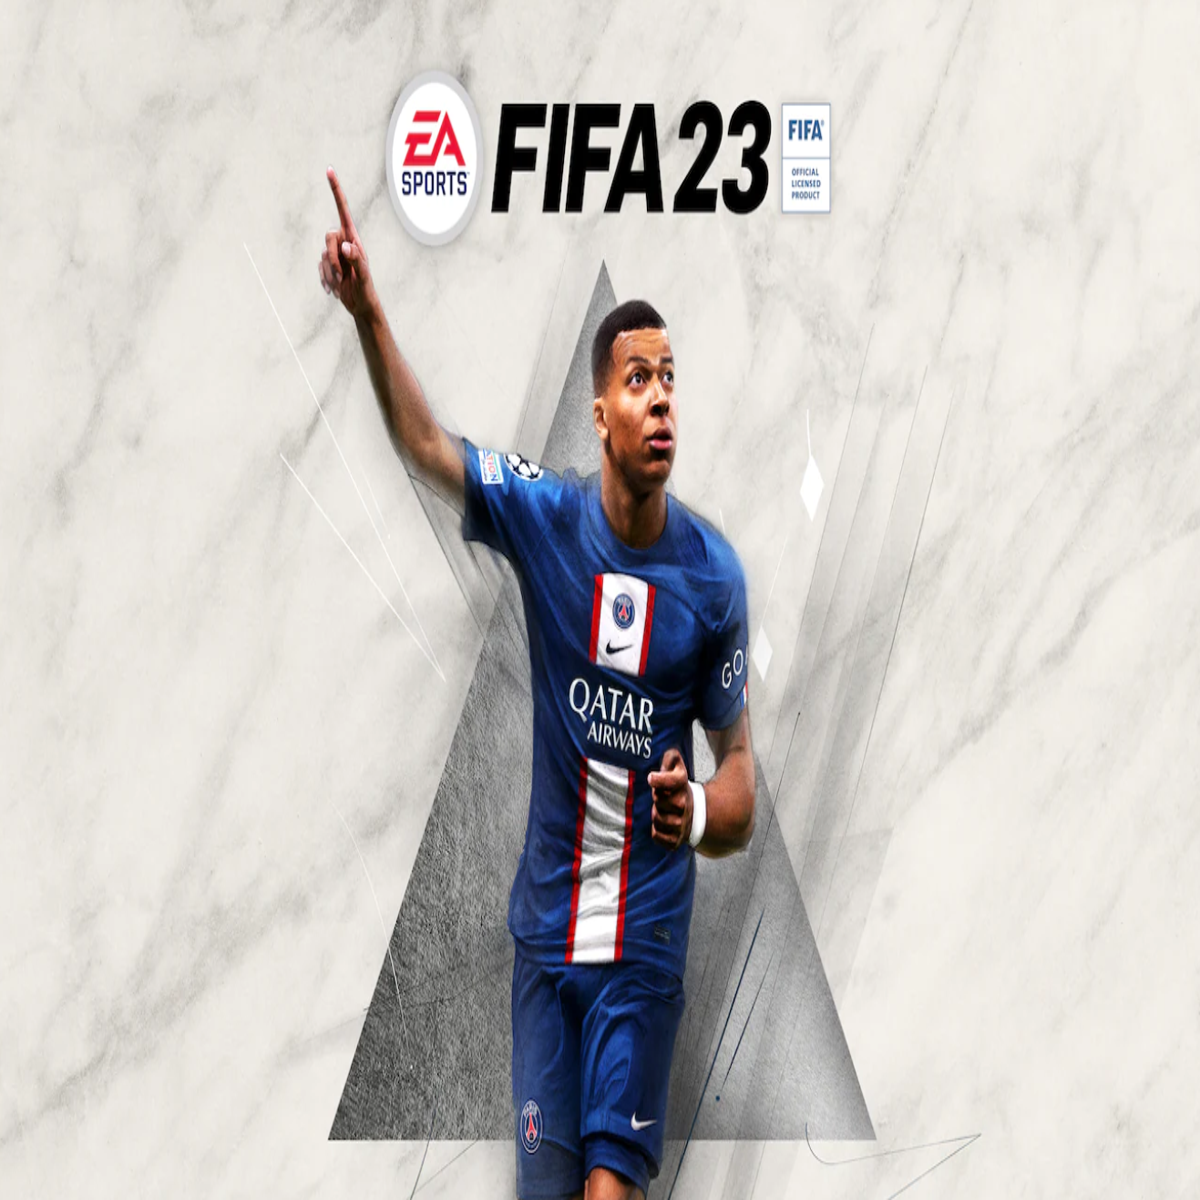 FIFA 23 takes three positions in the weekly Steam sales chart